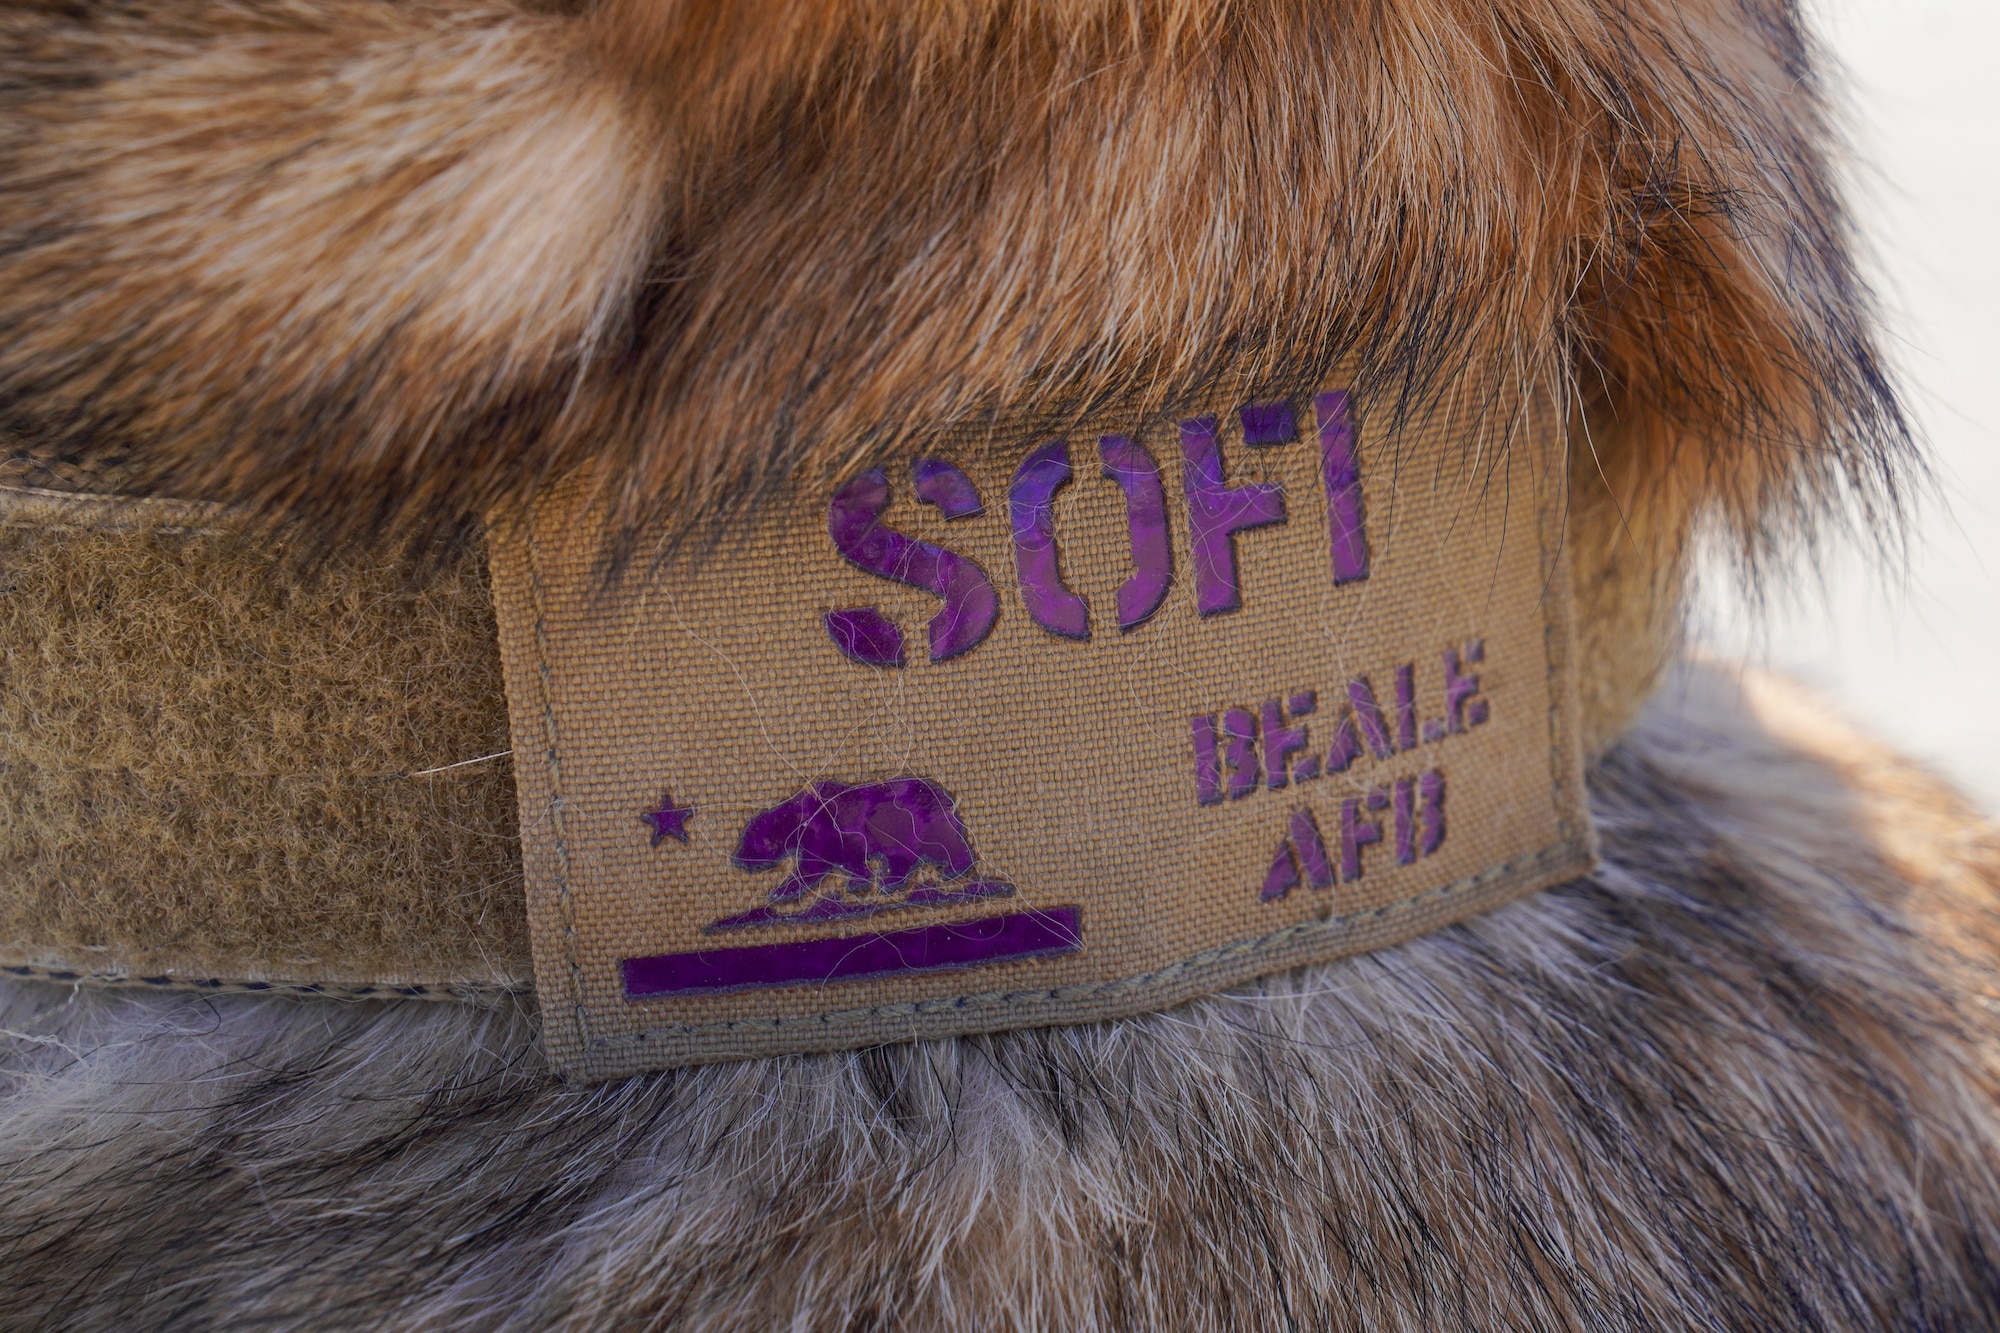 U.S. Air Force 9th Security Forces Squadron military working dog, Sofi, is photographed wearing a personalized dog tag after conducting explosive detection training, Sept. 14, 2023, at Beale Air Force Base, California.